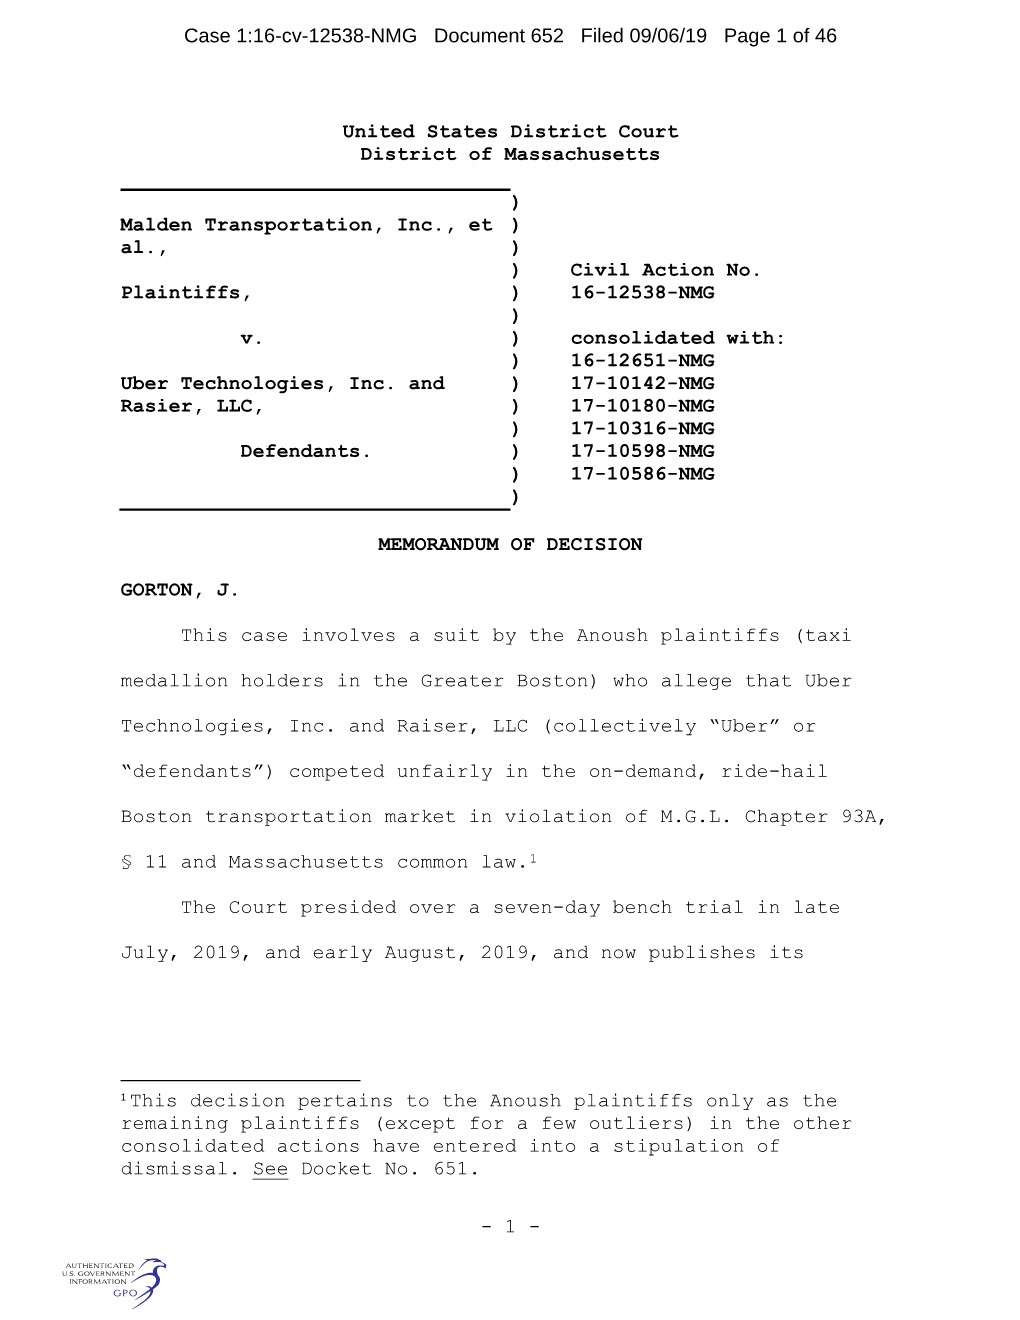 Case 1:16-Cv-12538-NMG Document 652 Filed 09/06/19 Page 1 of 46